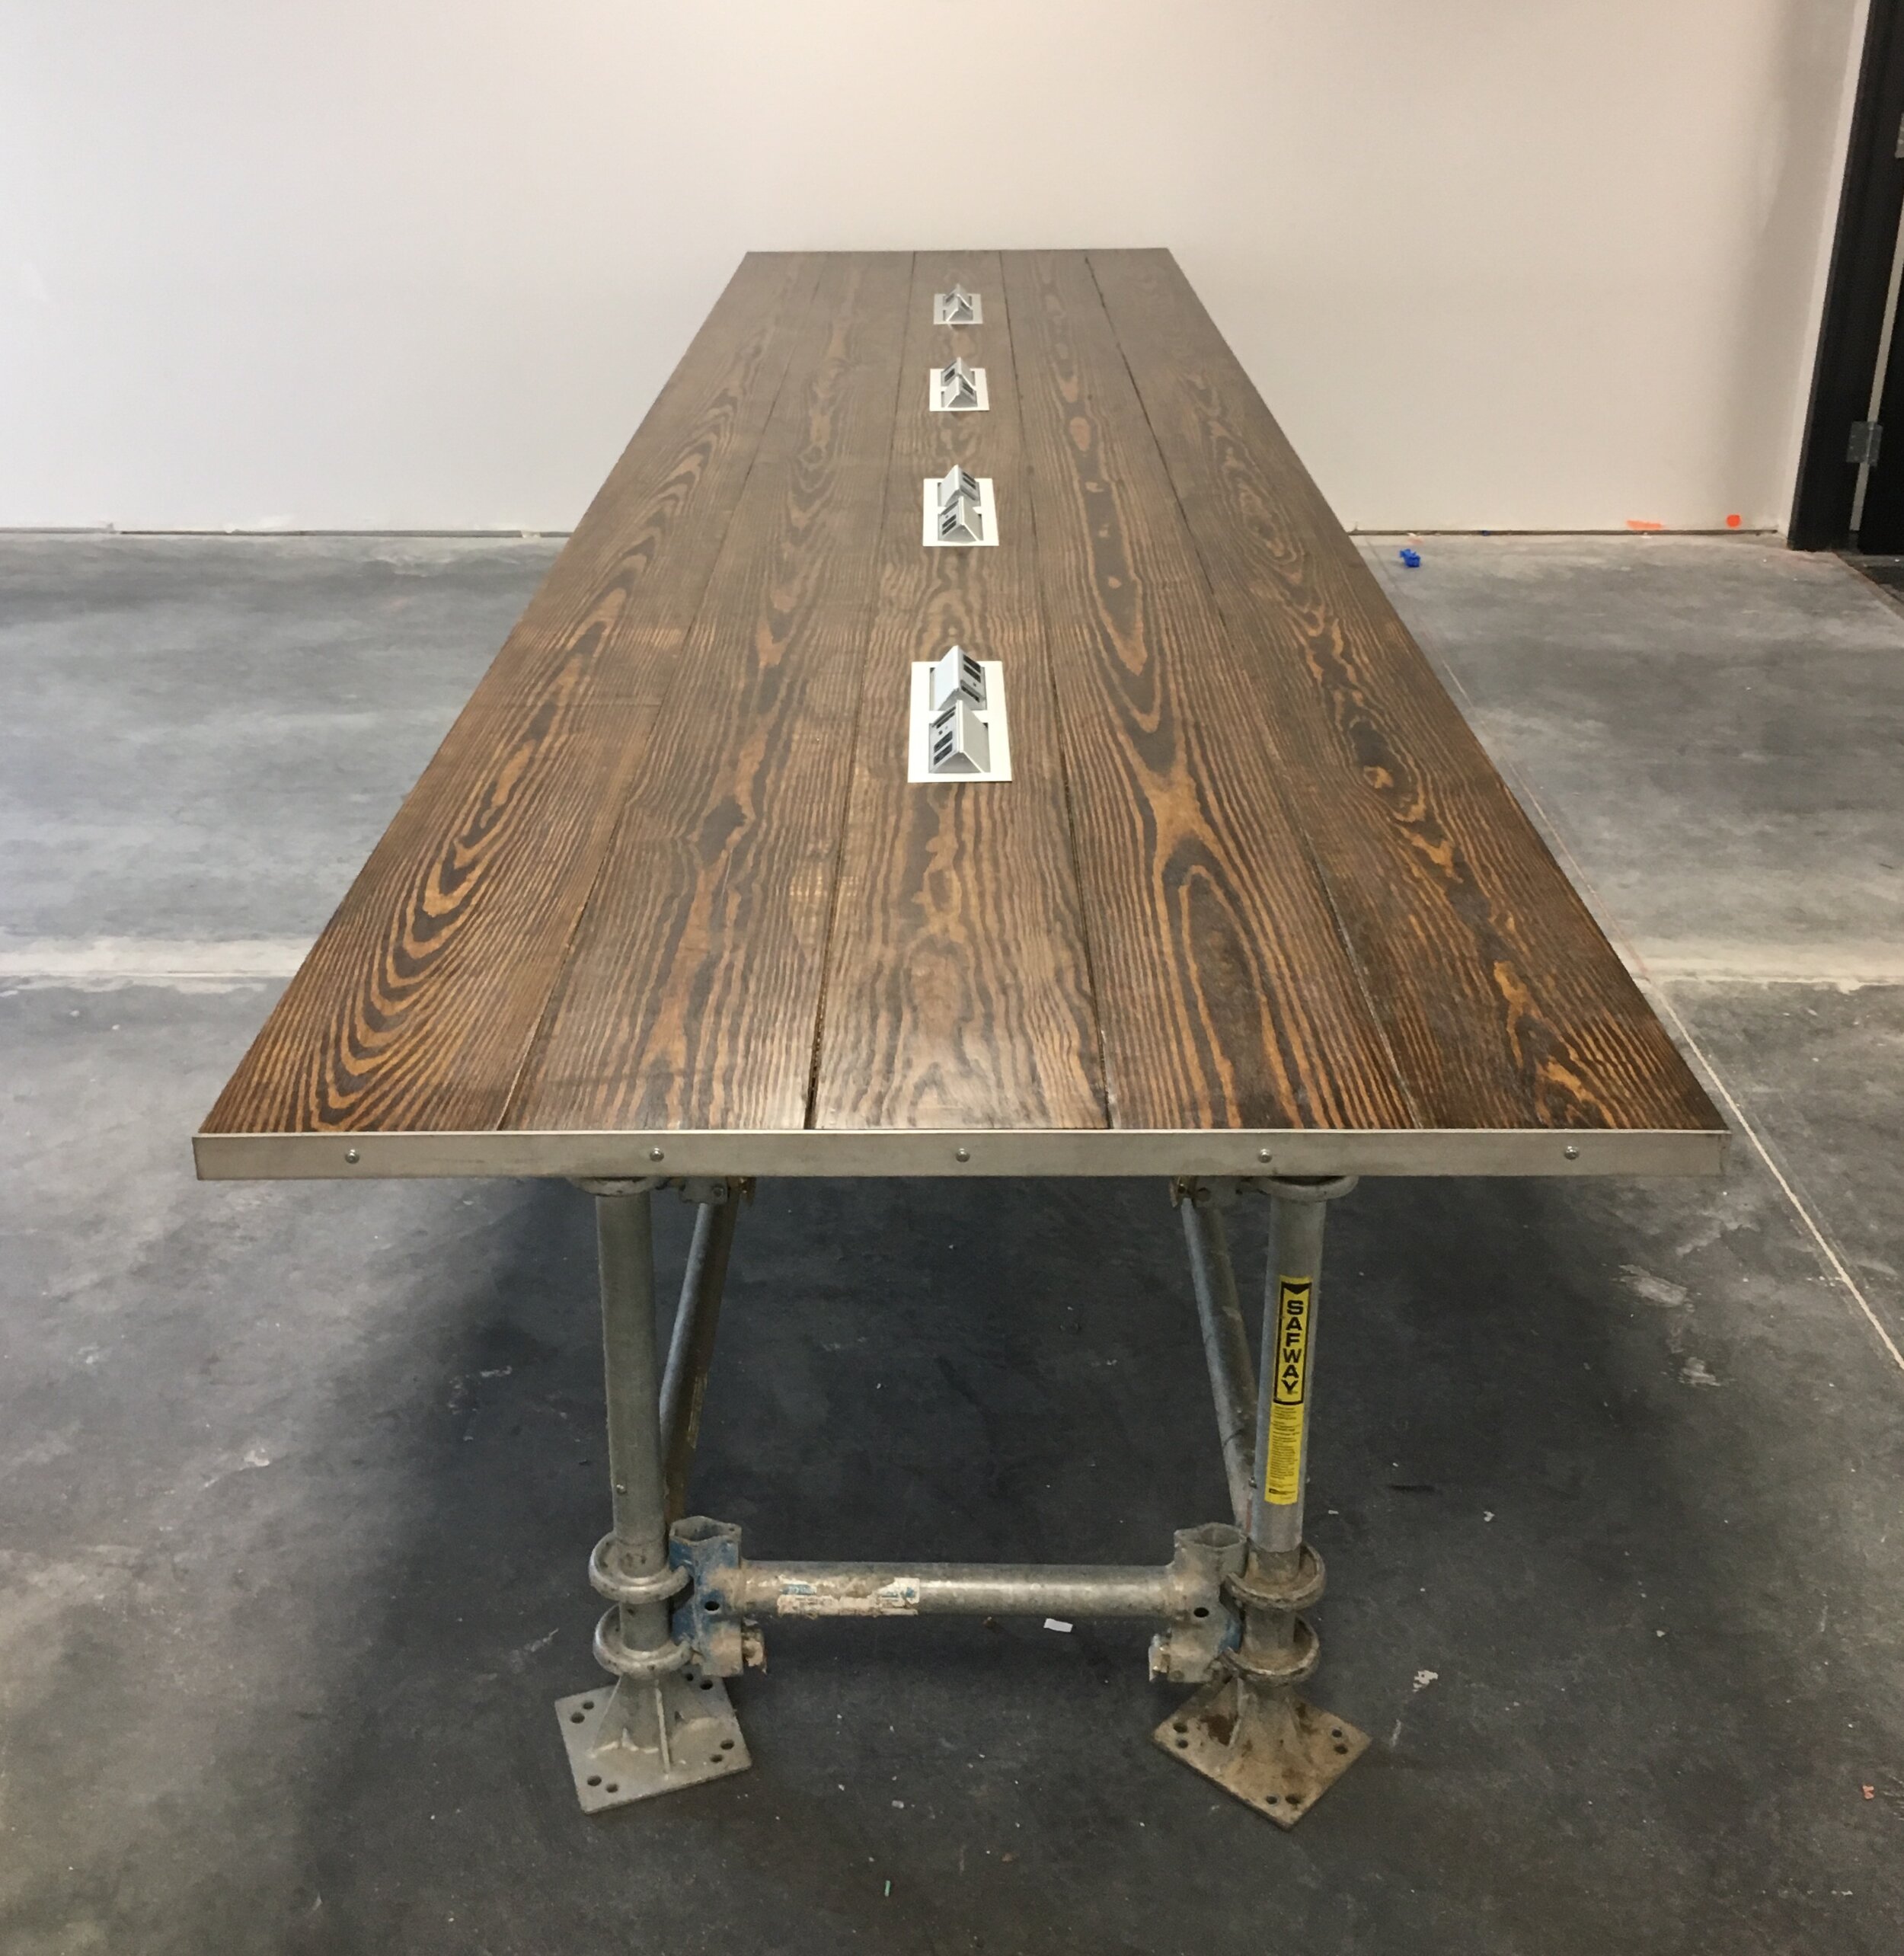 16' Conference table with Plug-ins